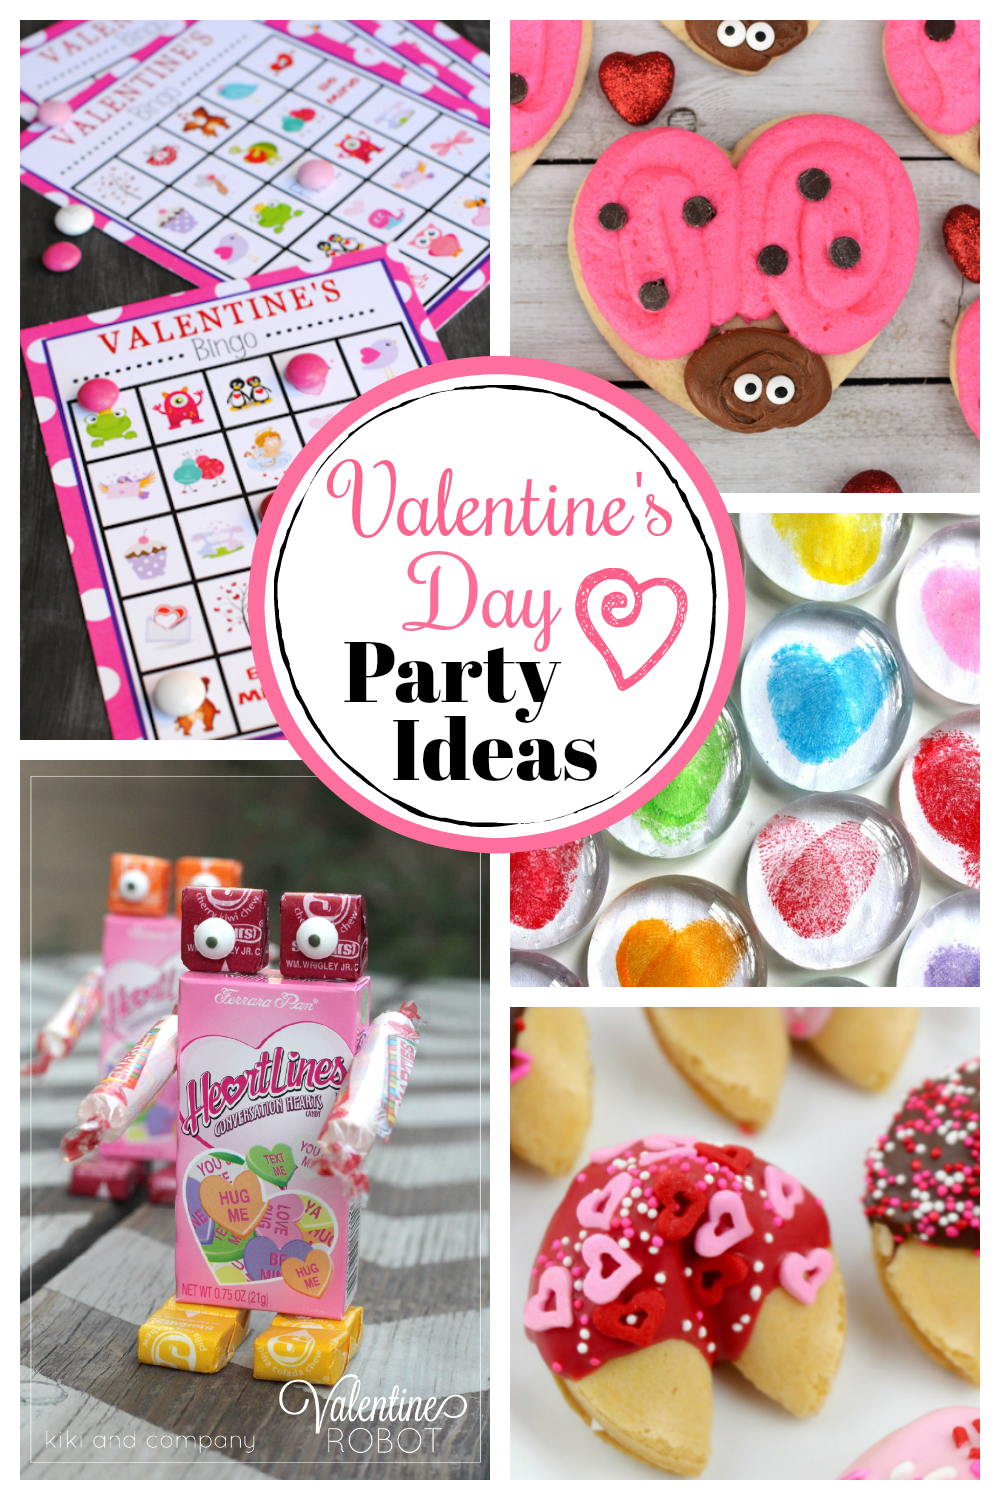 Fun Valentine's Day party ideas. Lots of fun and simple Valentine's party ideas. Crafts, games, and fun food ideas. #Valentinesday #Valentinesdayparty #Valentinespartyideas #Valentinesdayideas